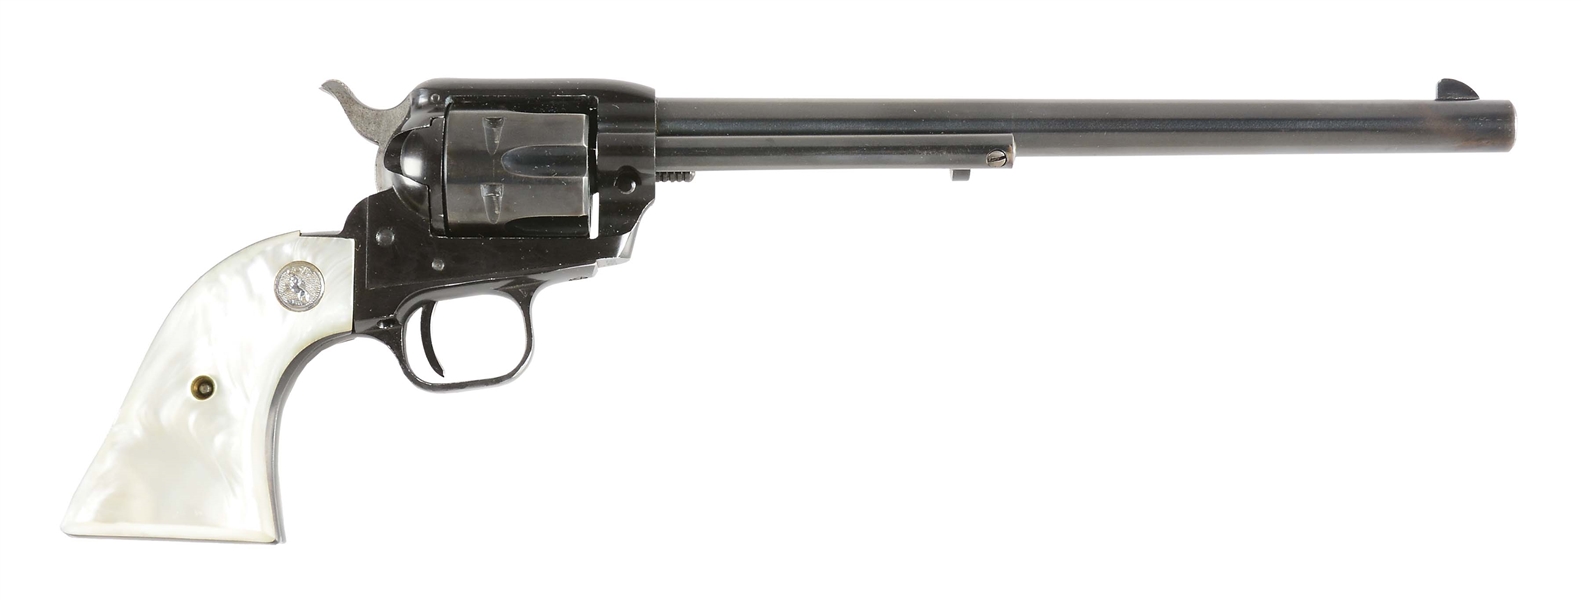 (C) COLT BUNTLINE SCOUT SINGLE ACTION REVOLVER WITH HOLSTER.